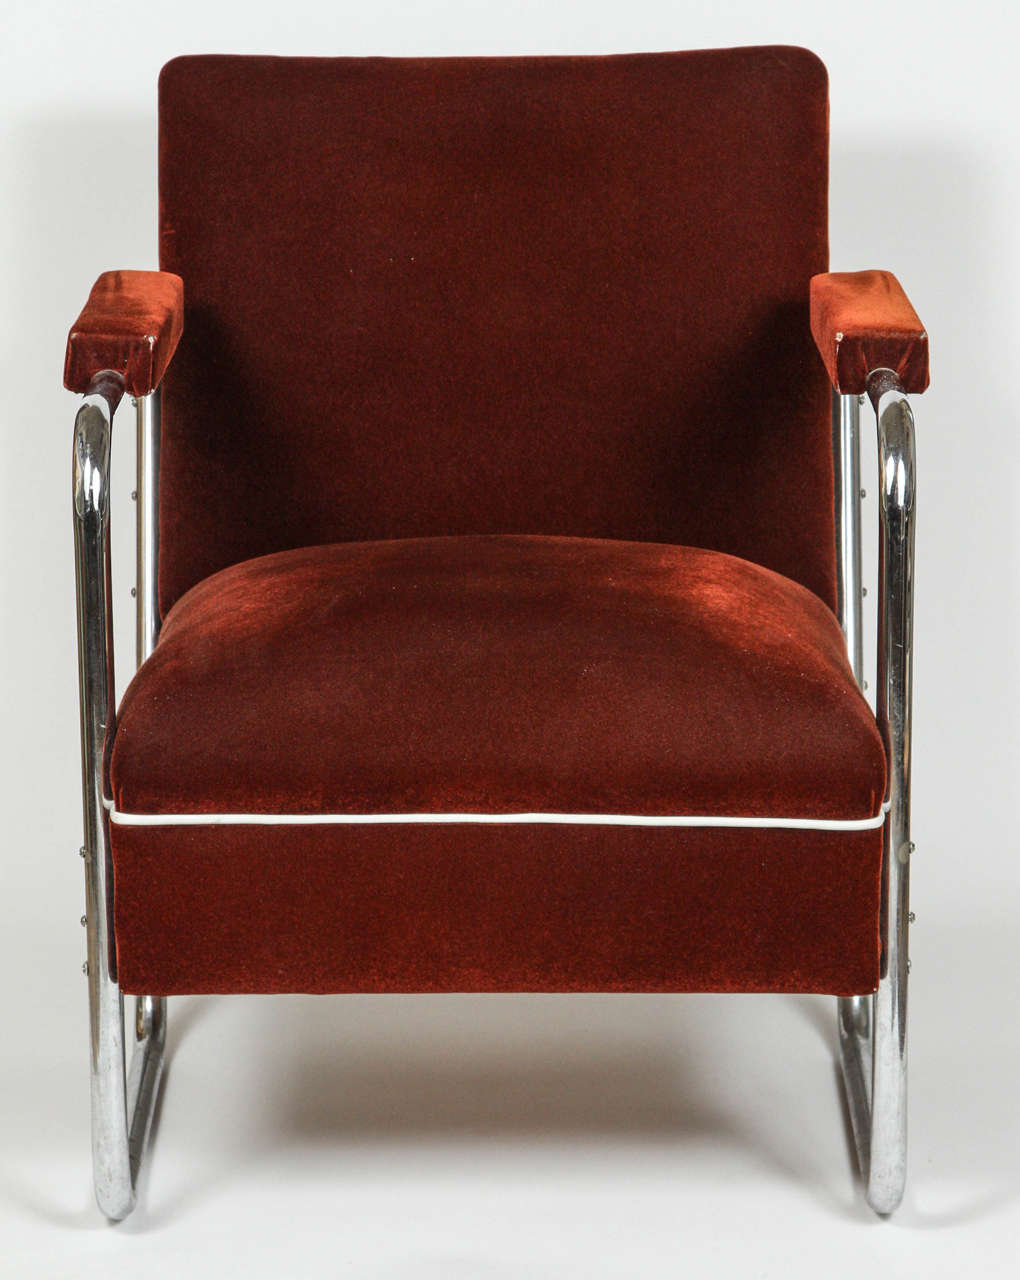 German design chrome chair with original mohair upholstery.